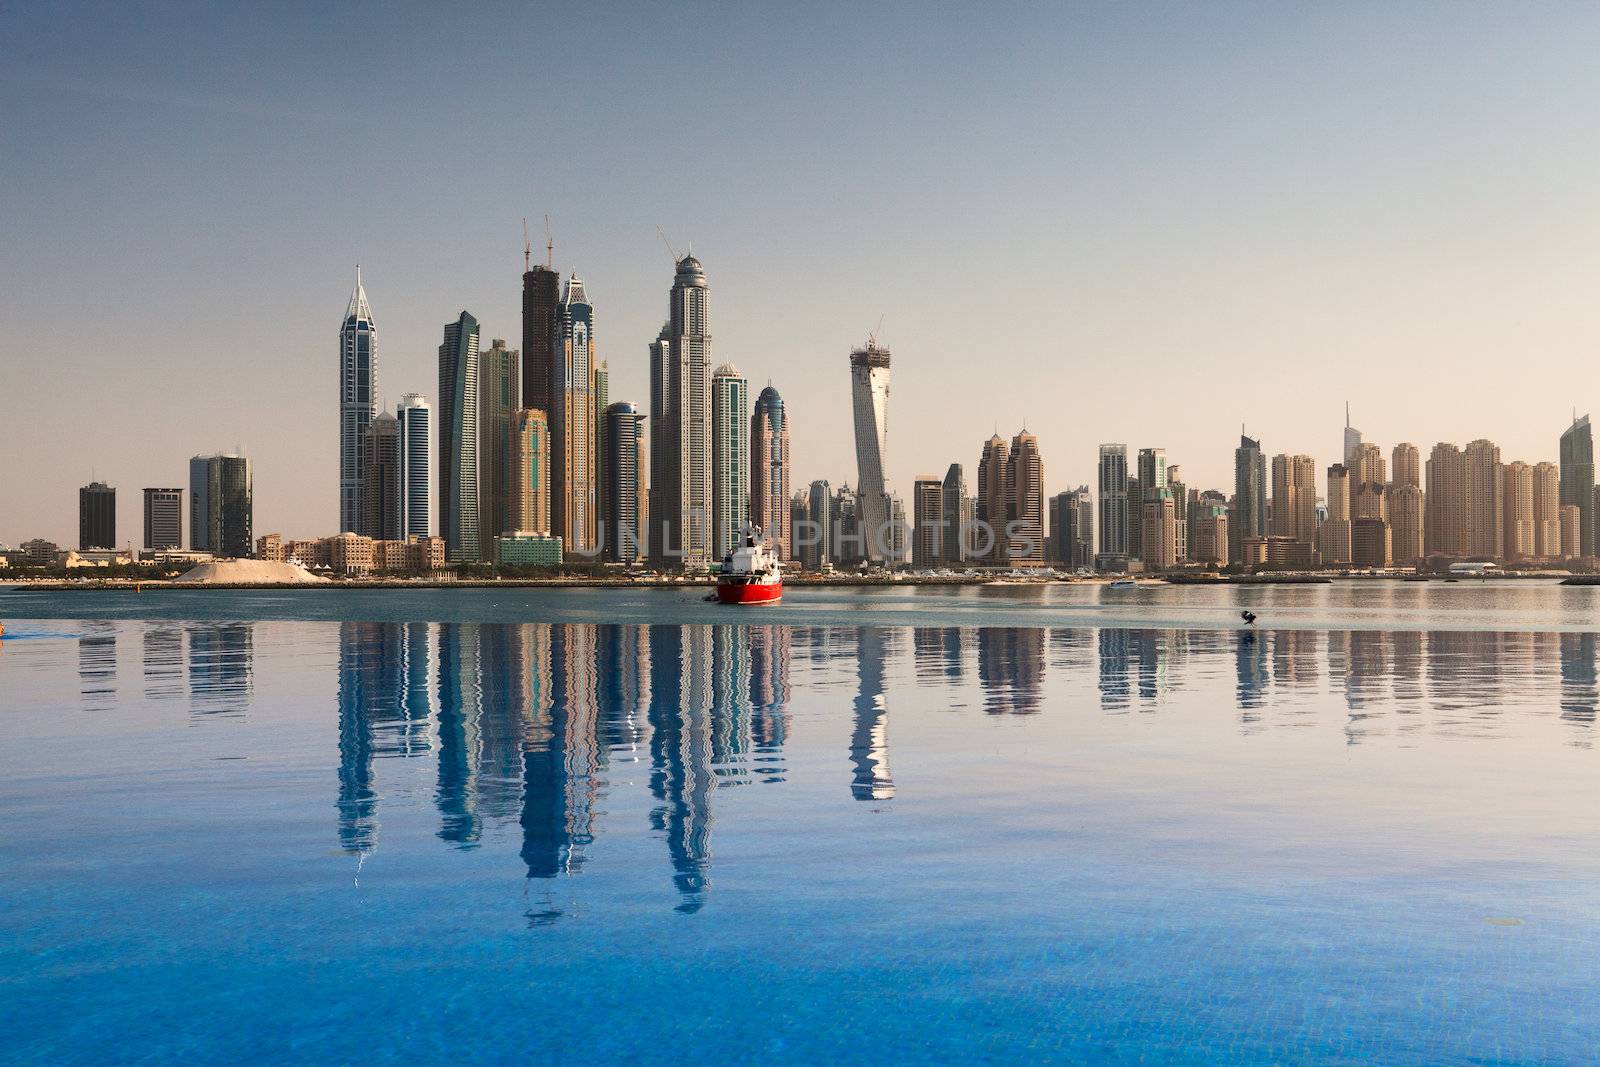 Reflection - The business district in Dubai